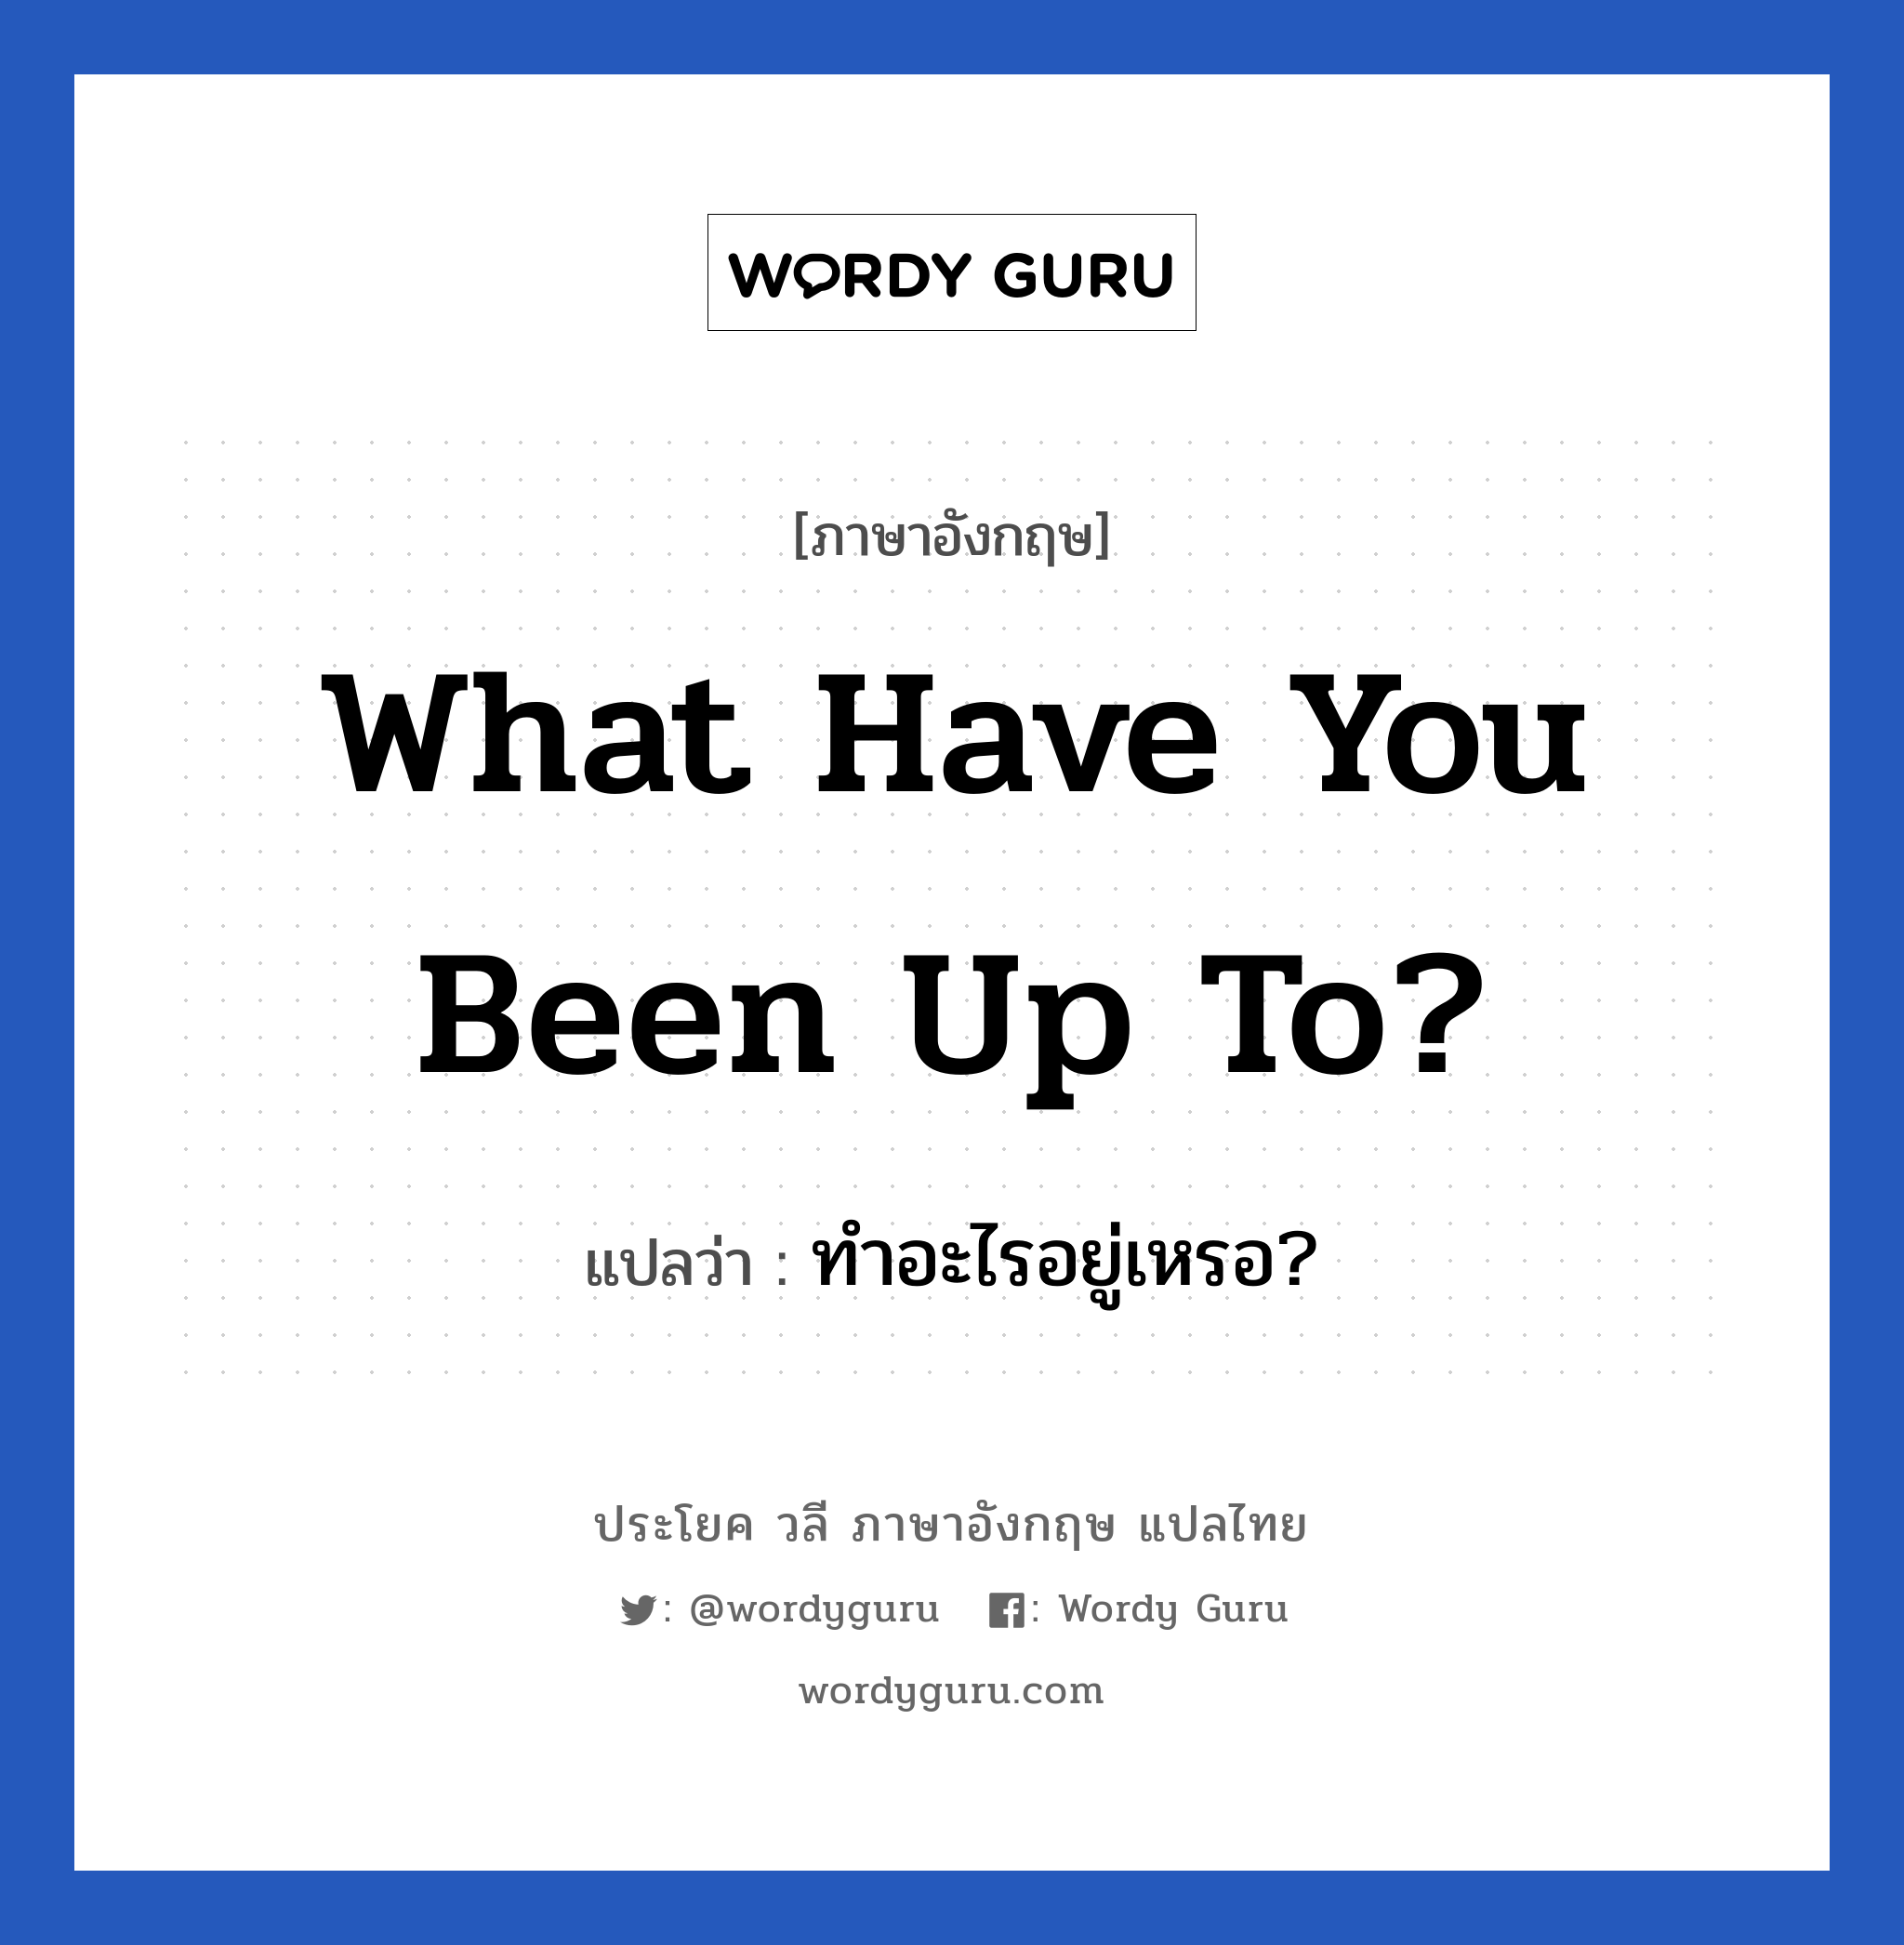 What have you been up to? แปลว่า?, วลีภาษาอังกฤษ What have you been up to? แปลว่า ทำอะไรอยู่เหรอ?